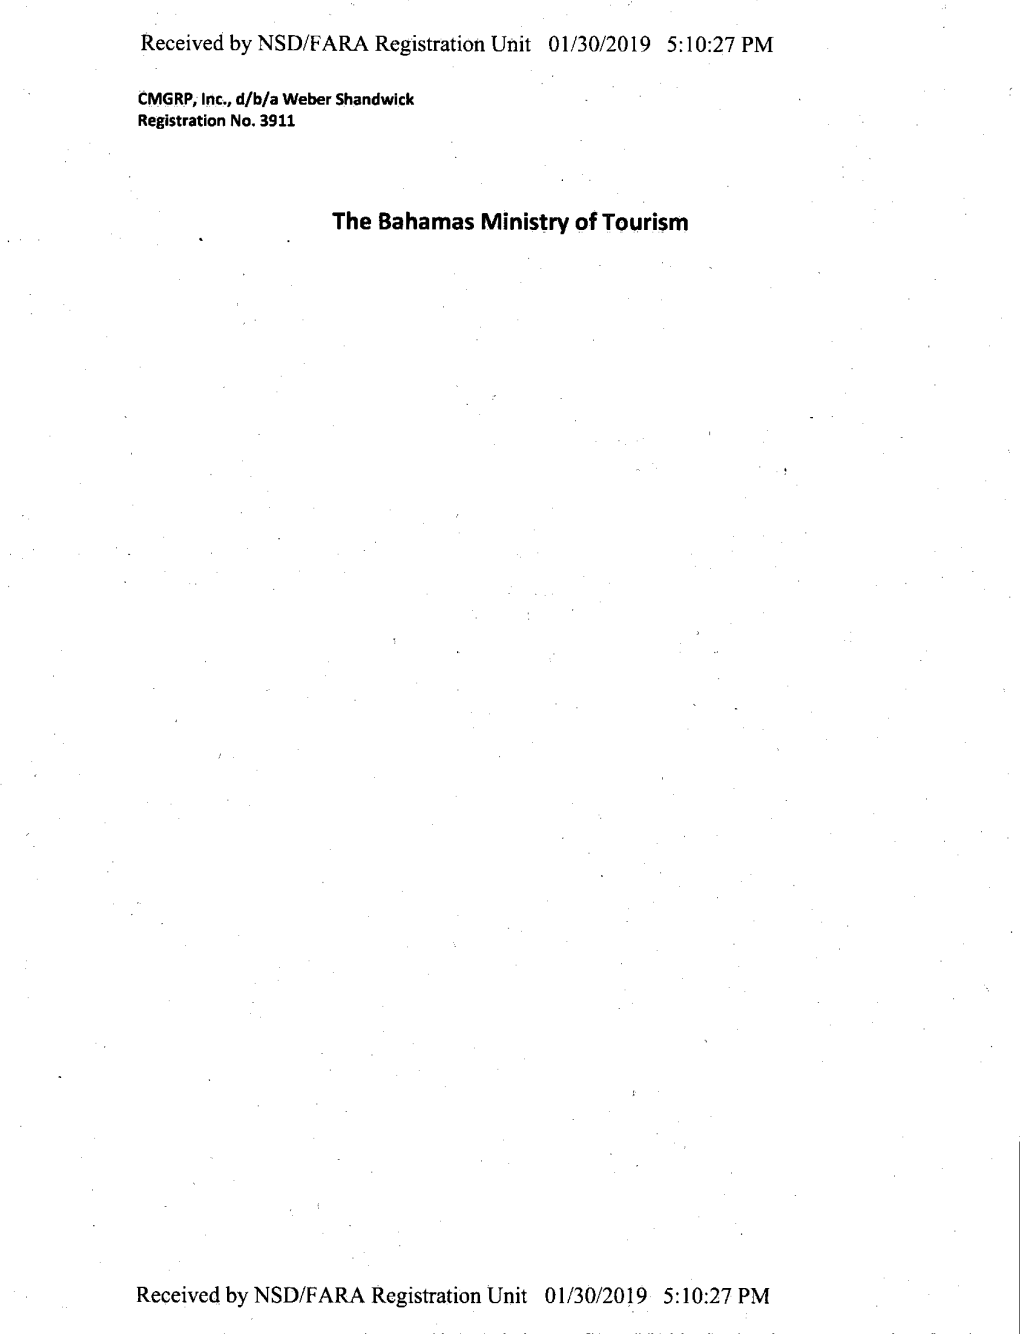 10:27 PM the Bahamas Ministry of Toljrism Received by NSD/FARA